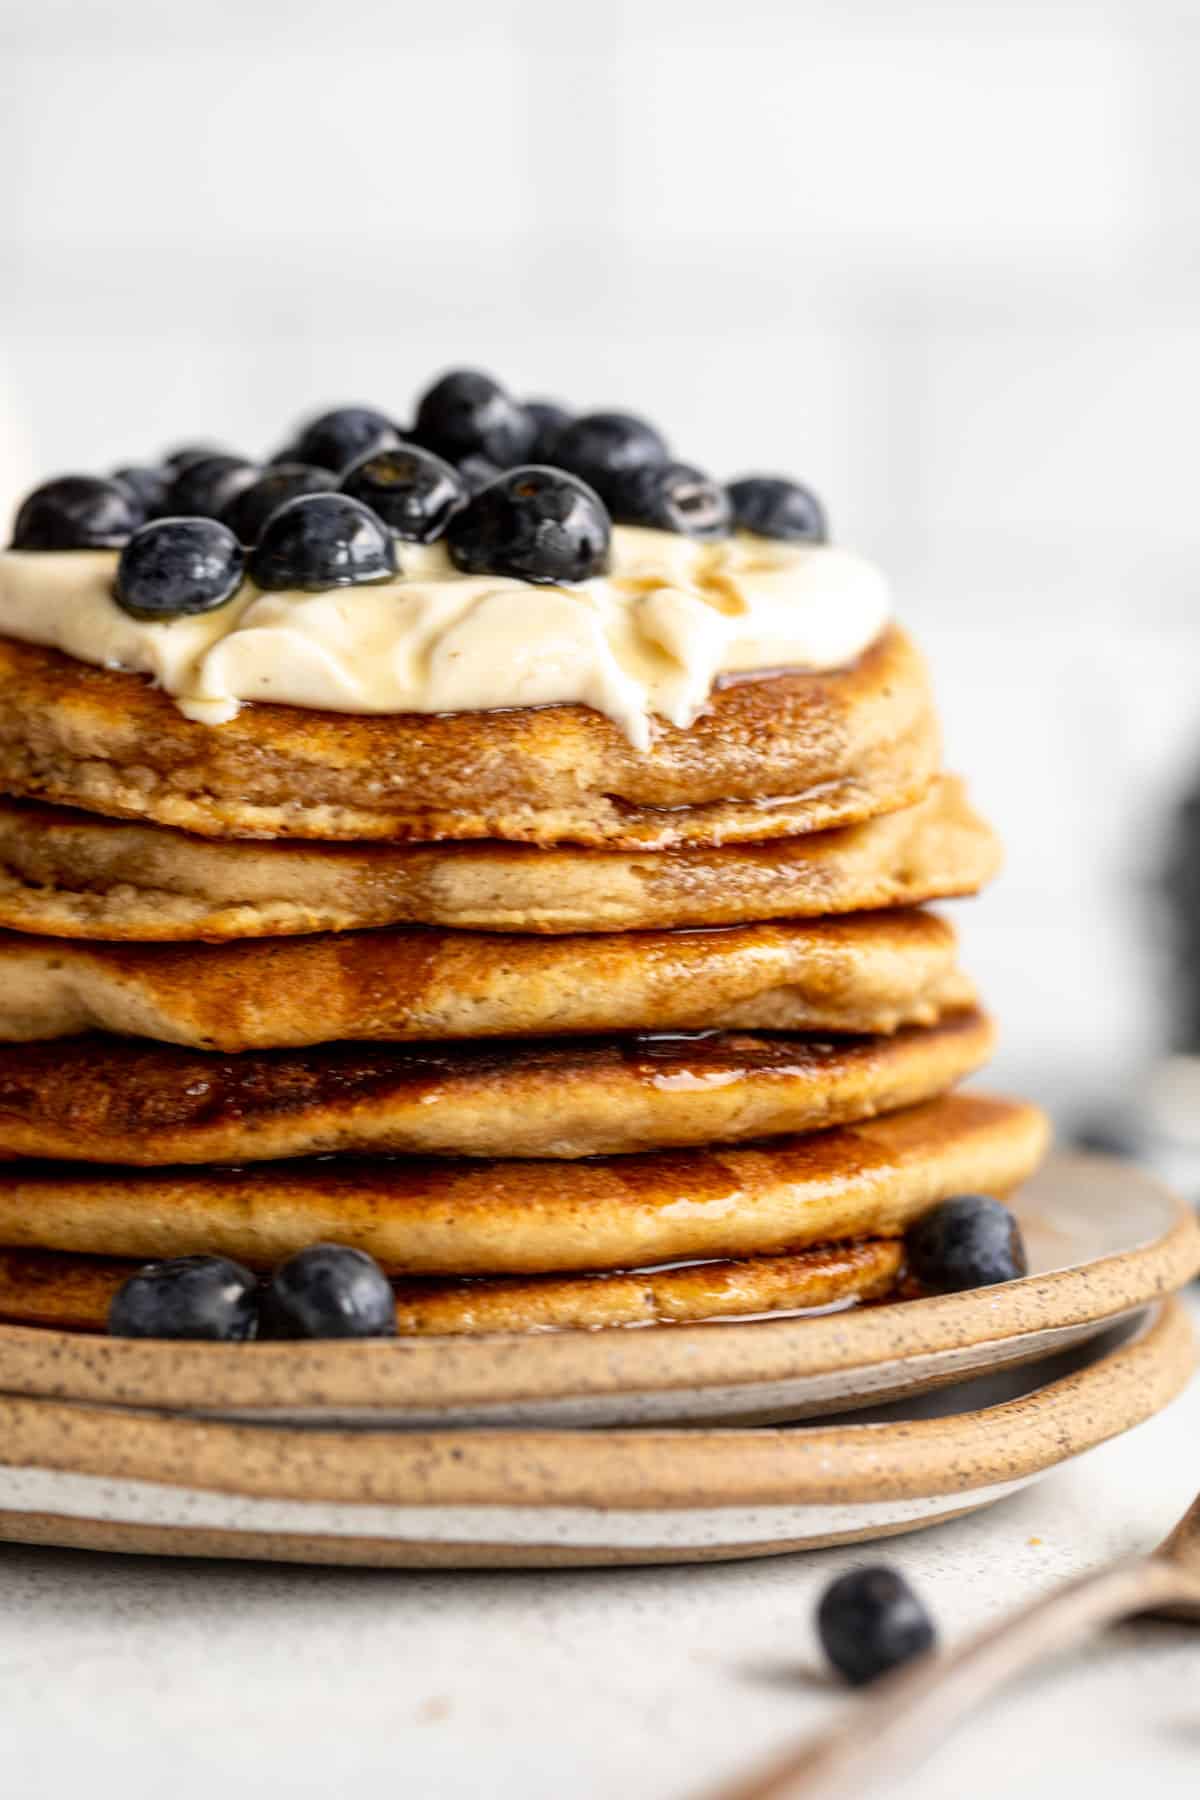 side view of the pancakes with yogurt and berries on top